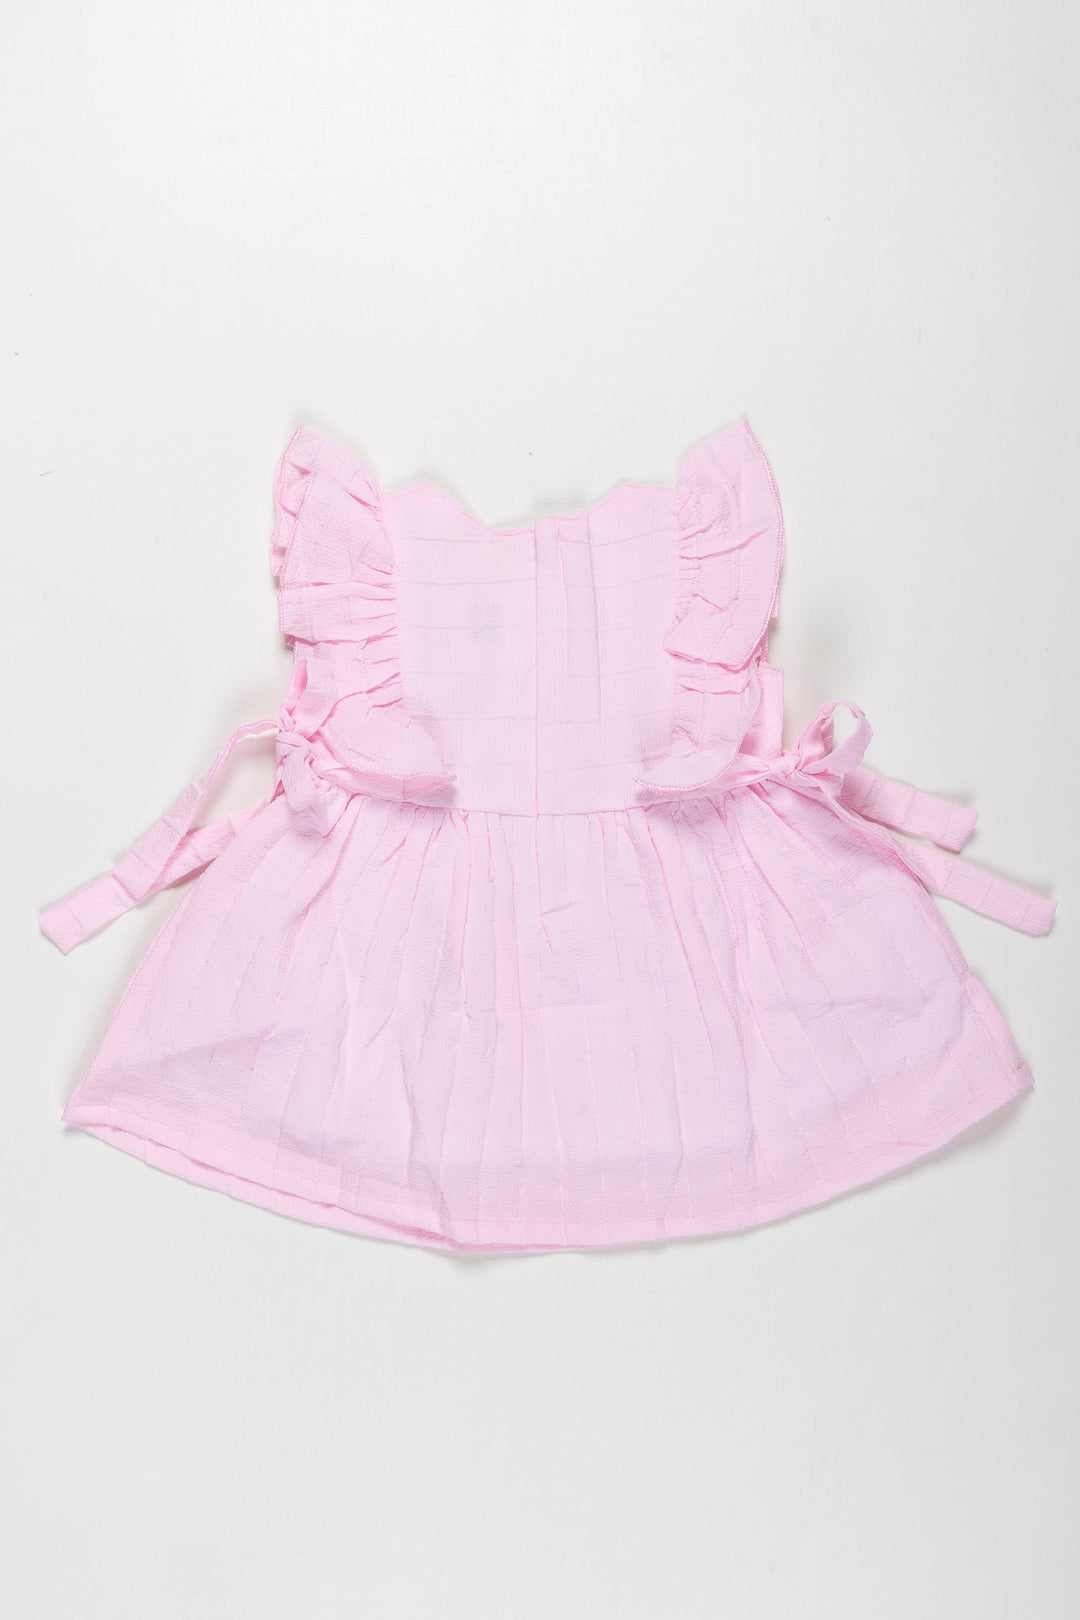 The Nesavu Baby Cotton Frocks Pink Princess Geometric Frock with Frill Accents for Baby Girls Nesavu Chic Pink Cotton Frilled Frock for Infants | Baby Girls Geometric Charm | The Nesavu